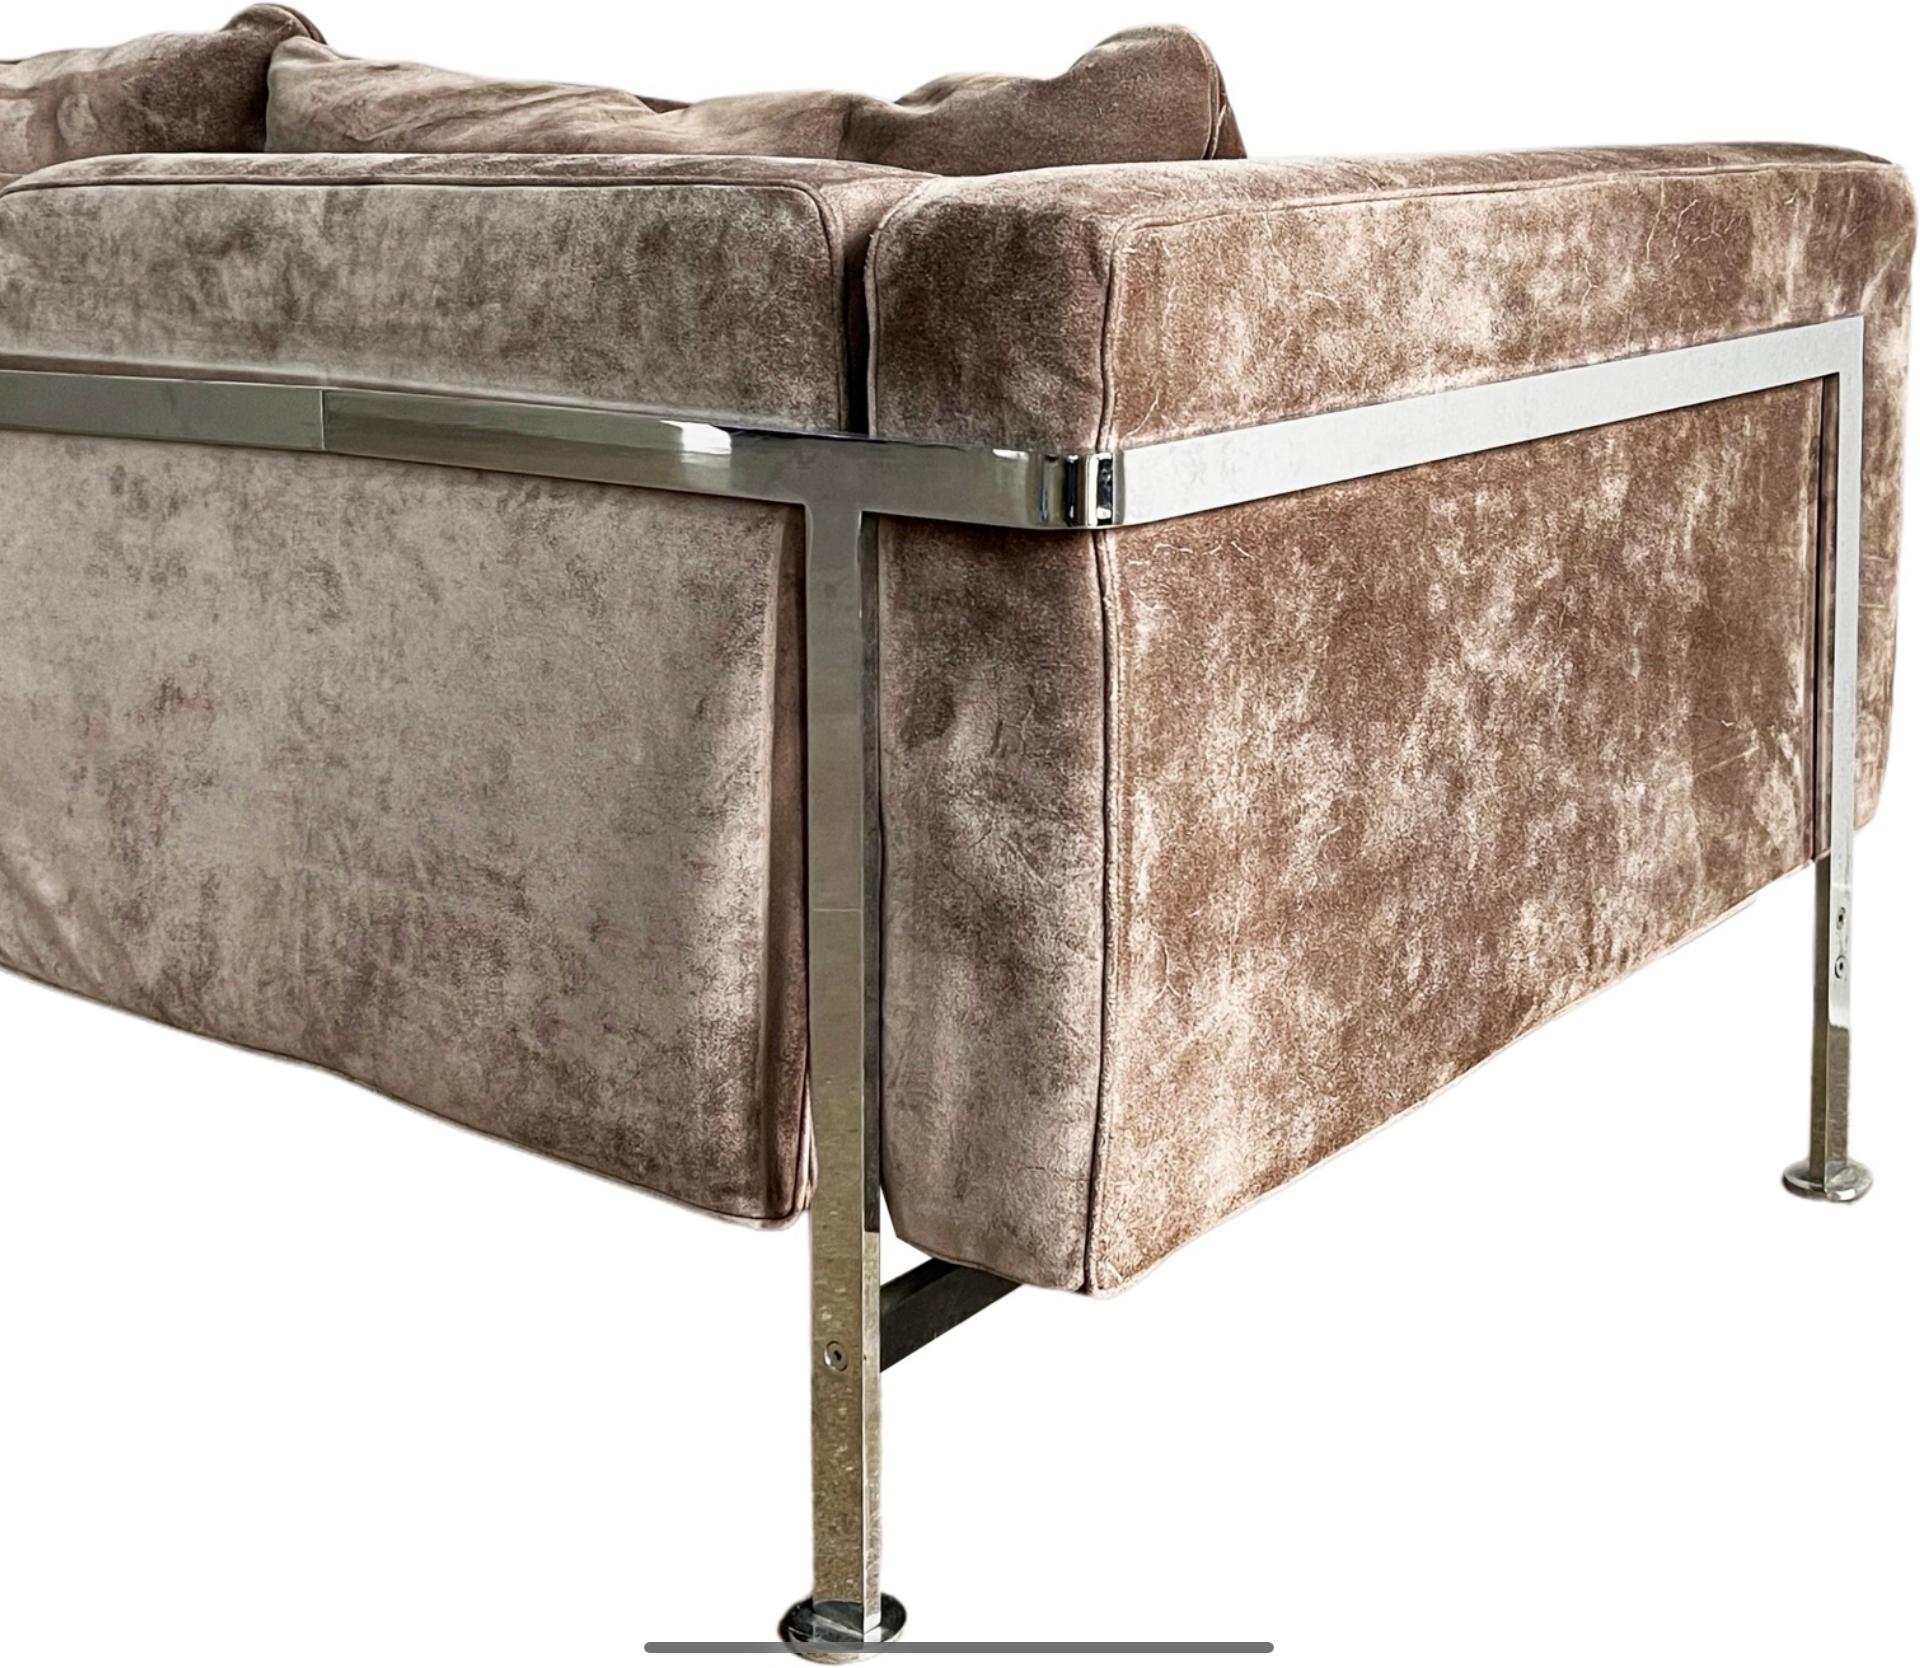 Comfort meets luxury with this gorgeous piece that you can melt into. Highly coveted Robert Haussmann for De Sede RH 302 Sofa. This suede sofa is designed with a chromed iron frame that functions as a basket for the cushions. It is heaven to sit in.